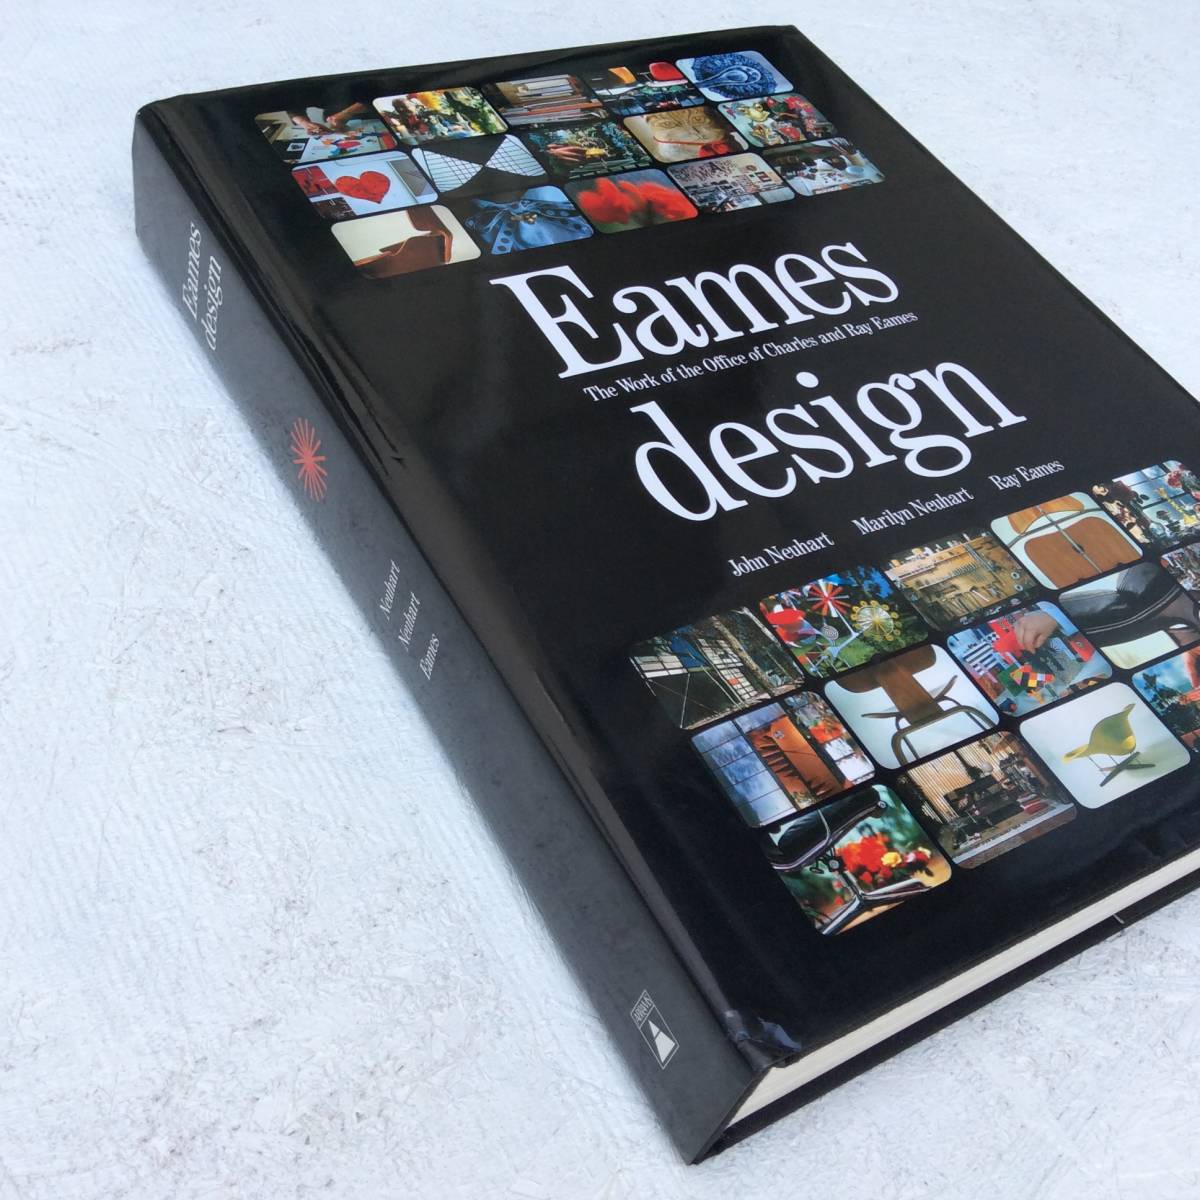 Eames Design : The Work of the Office of Charles and Ray Eames（イームズ・デザイン）の画像2